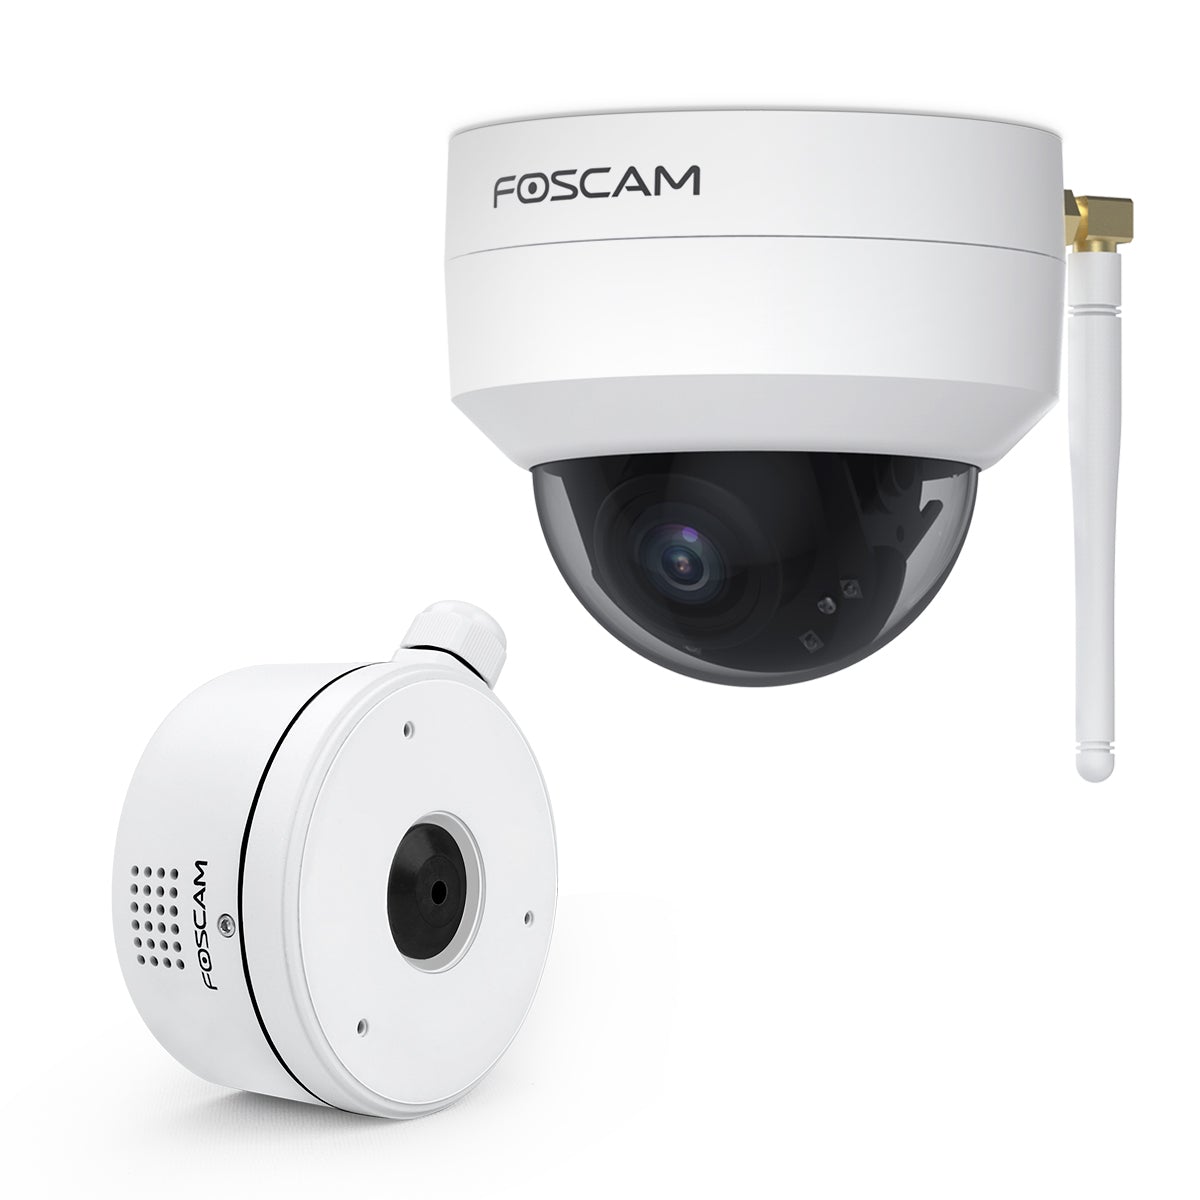 FOSCAM Refurbished VZ4 4X Optical Zoom PT 4MP Outdoor Security WiFi Camera